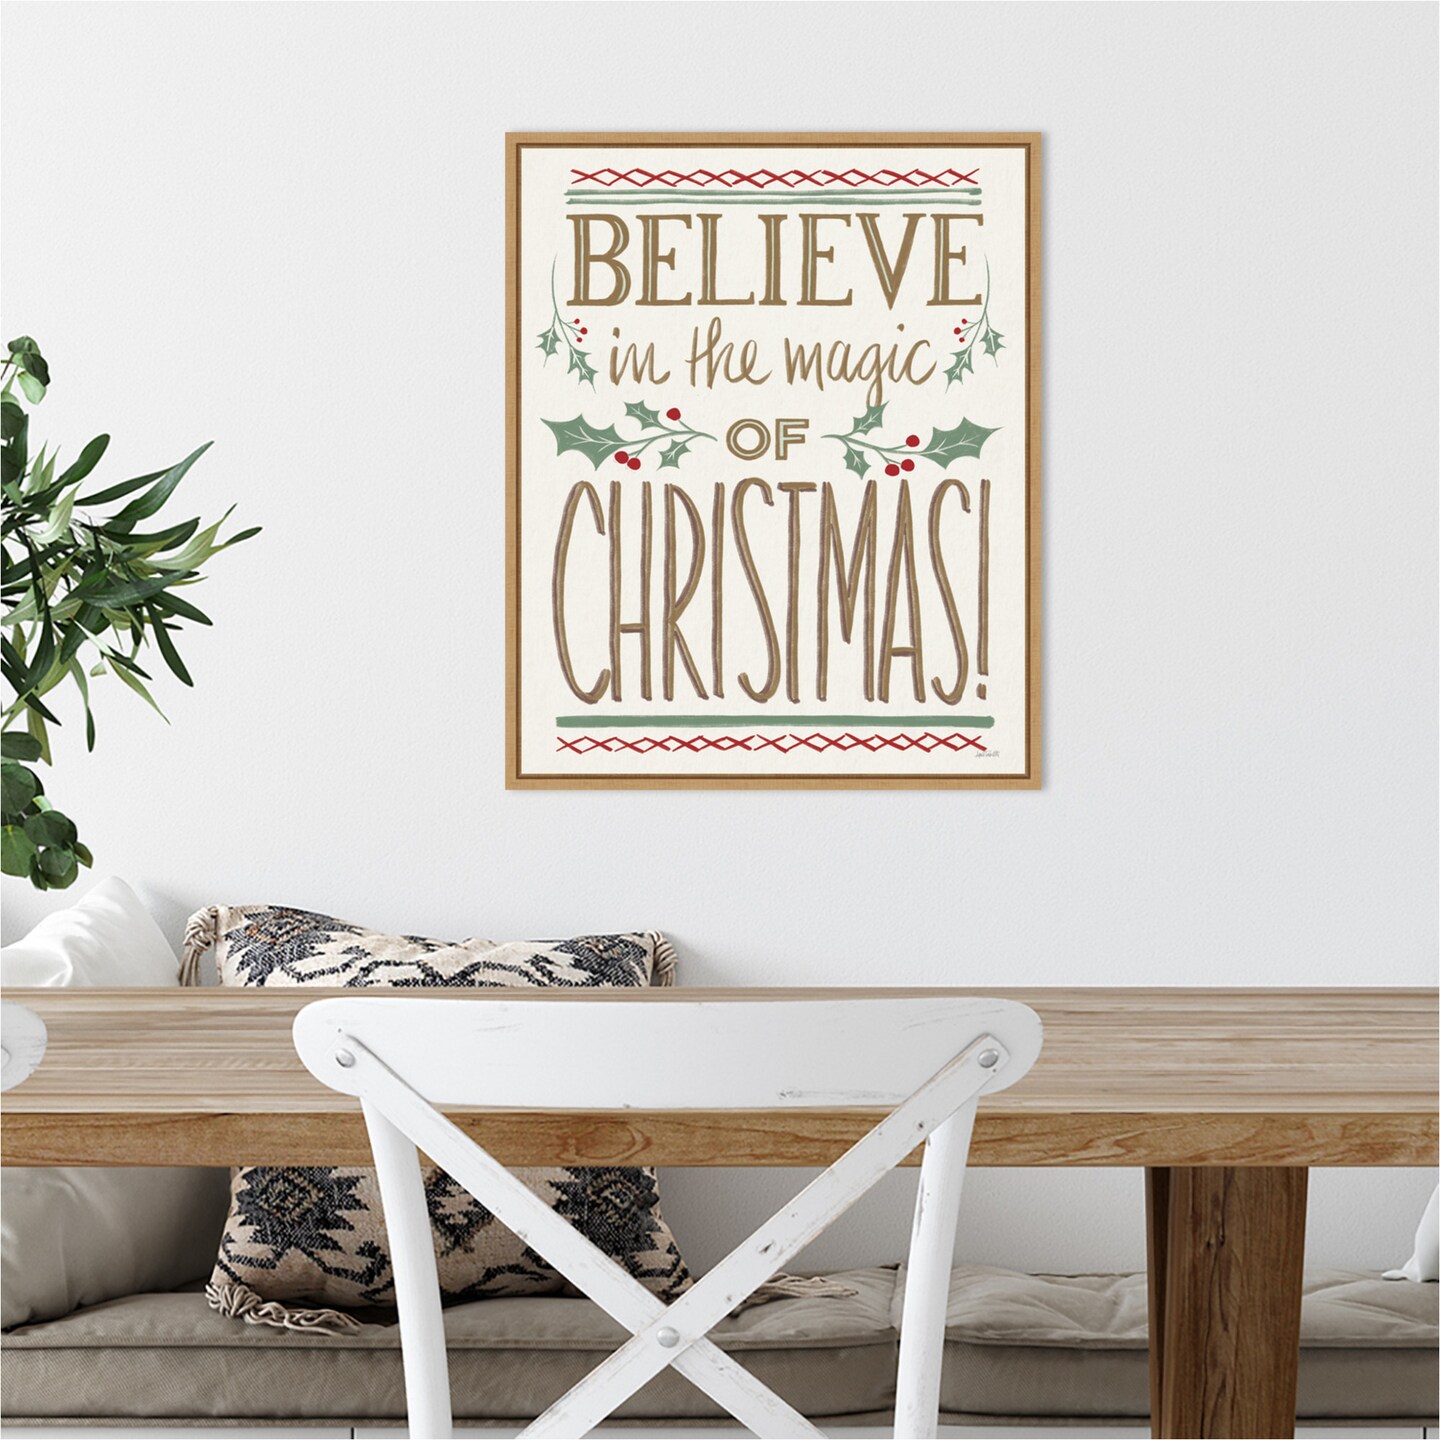 Believe in the Magic of Christmas by Anne Tavoletti 16-in. W x 20-in. H. Canvas Wall Art Print Framed in Natural